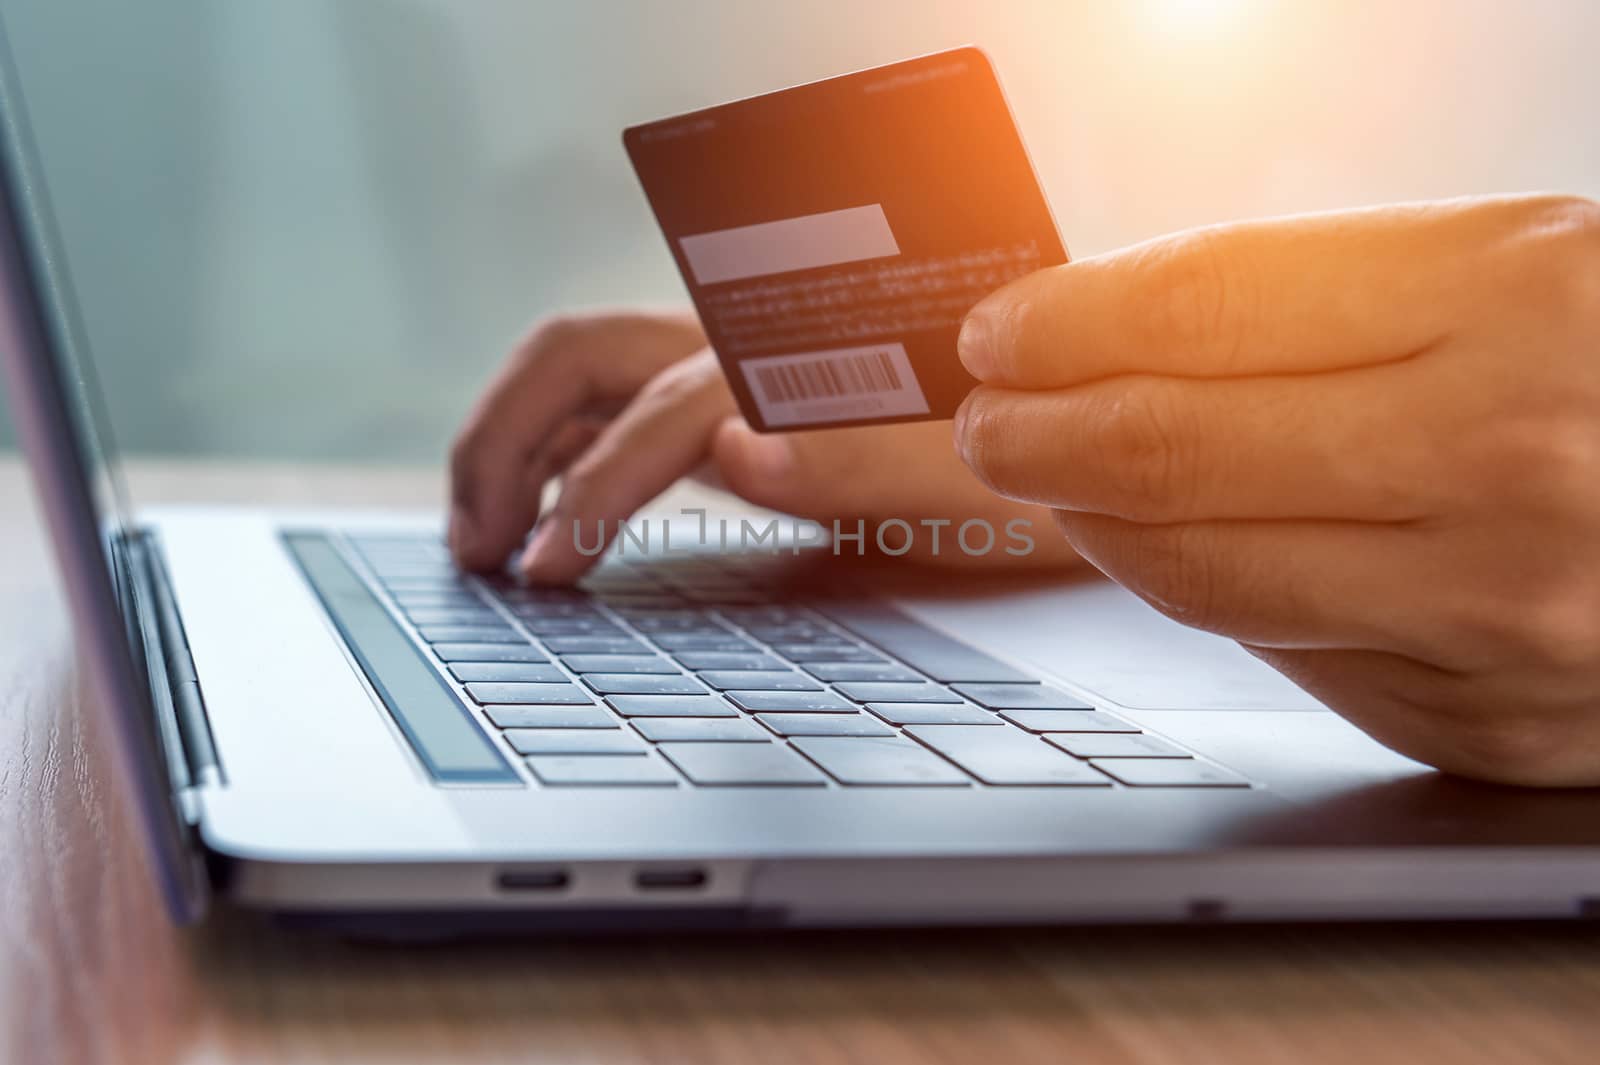 Online shopping concept. Hands holding credit card and using laptop computer.